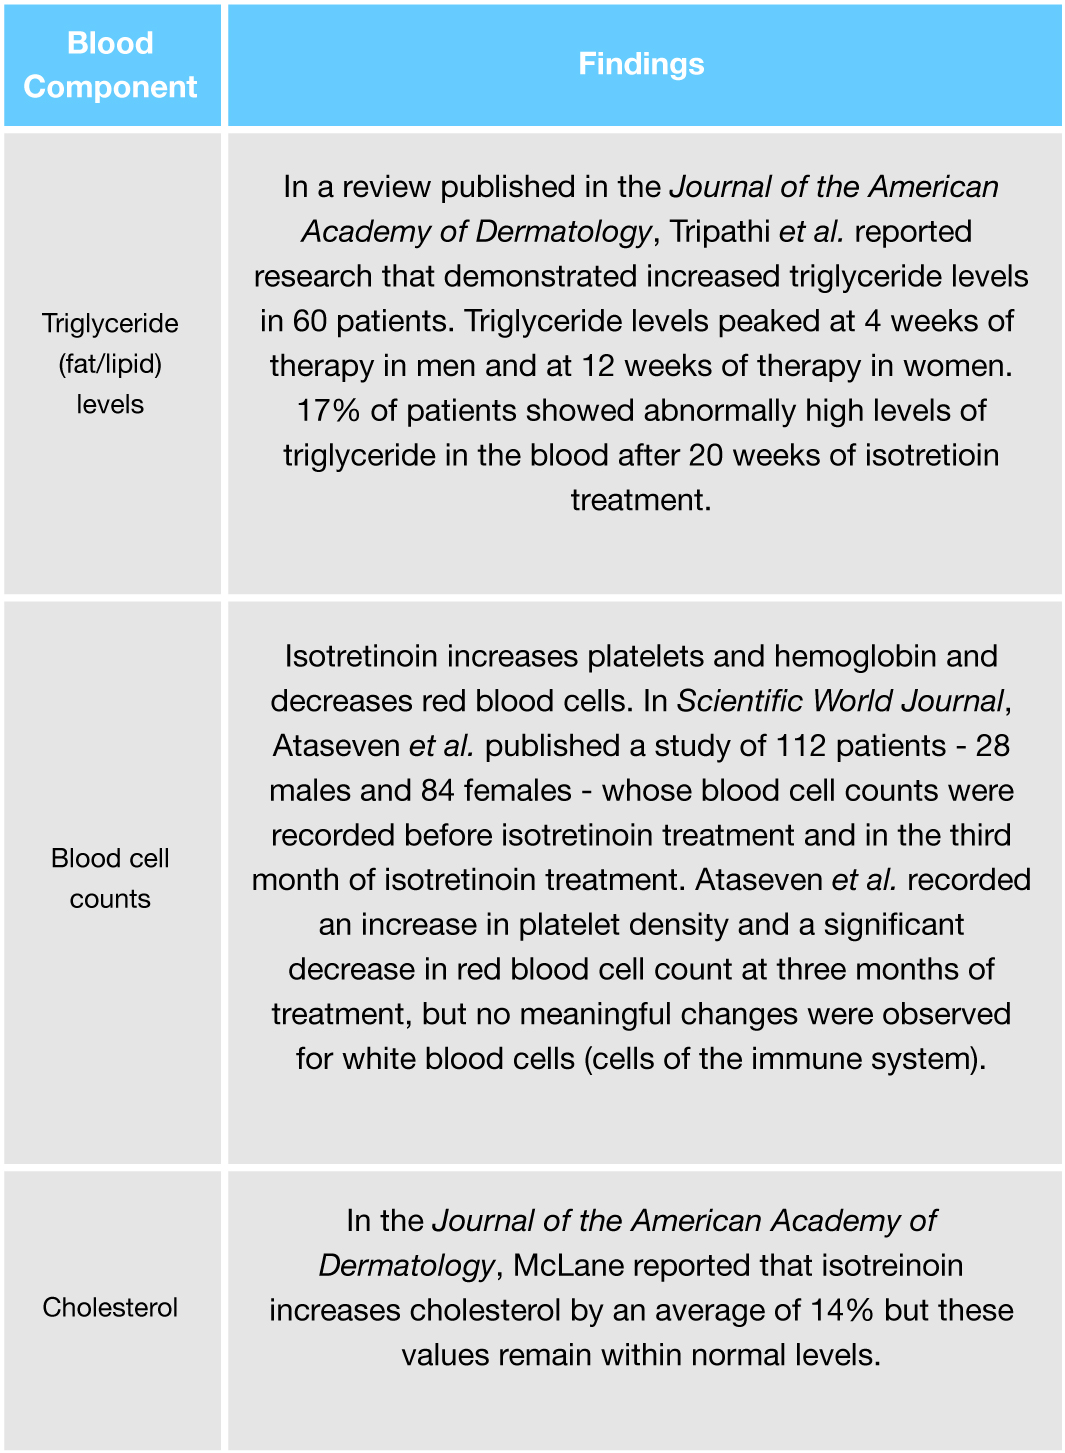 Blood lab results affected by isotretinoin